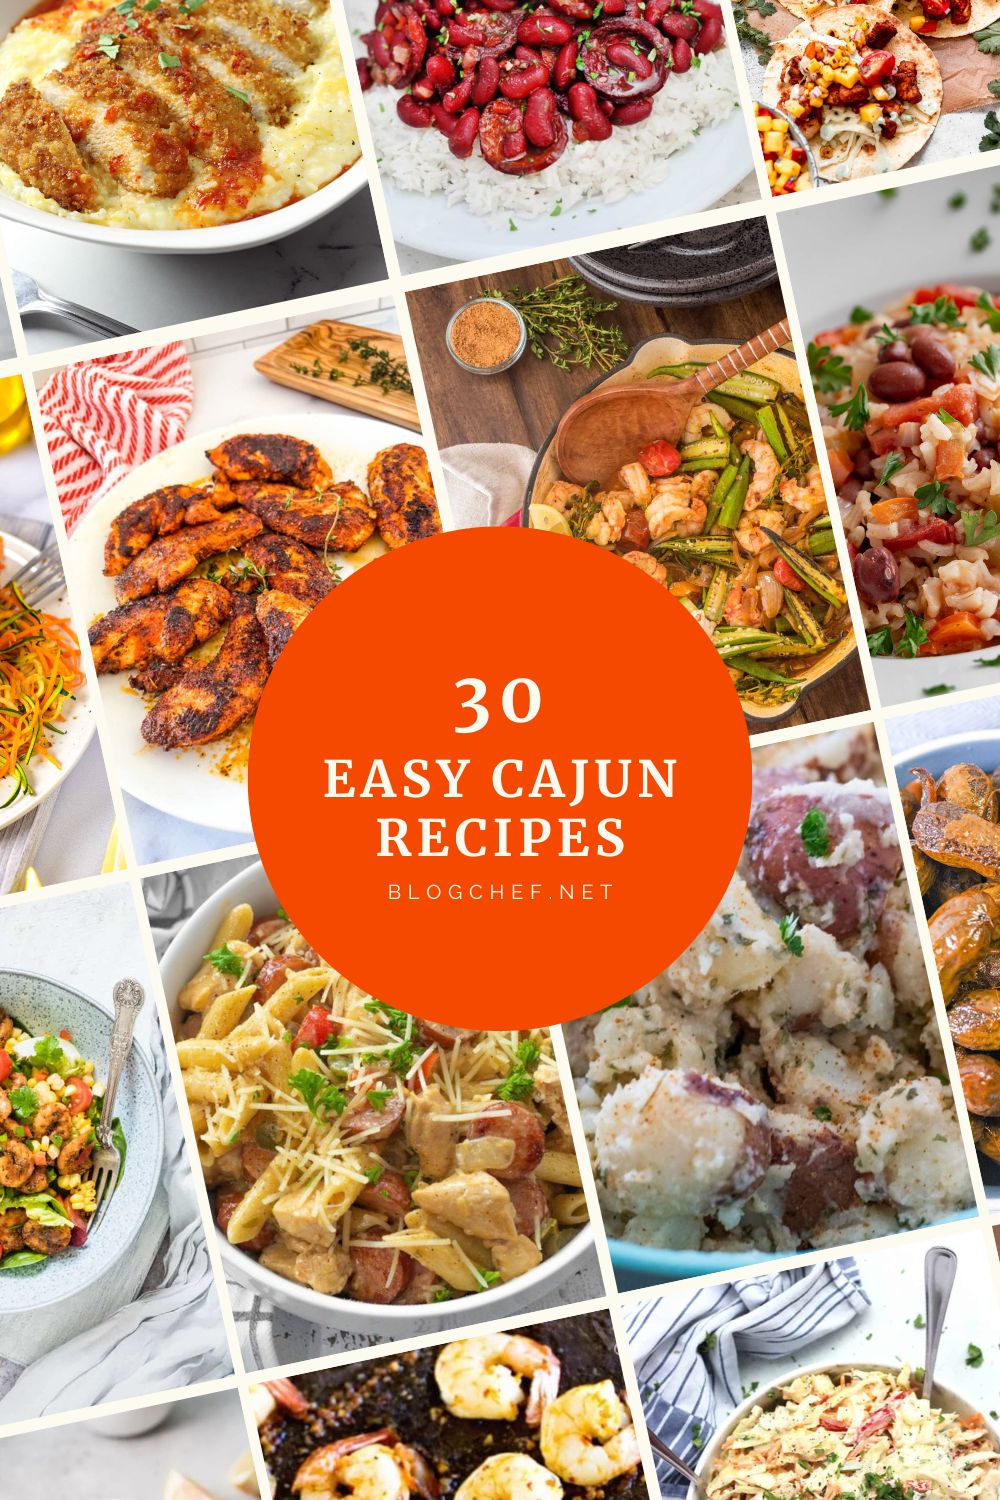 30 Easy Cajun Recipes to Celebrate Battle of New Orleans Day